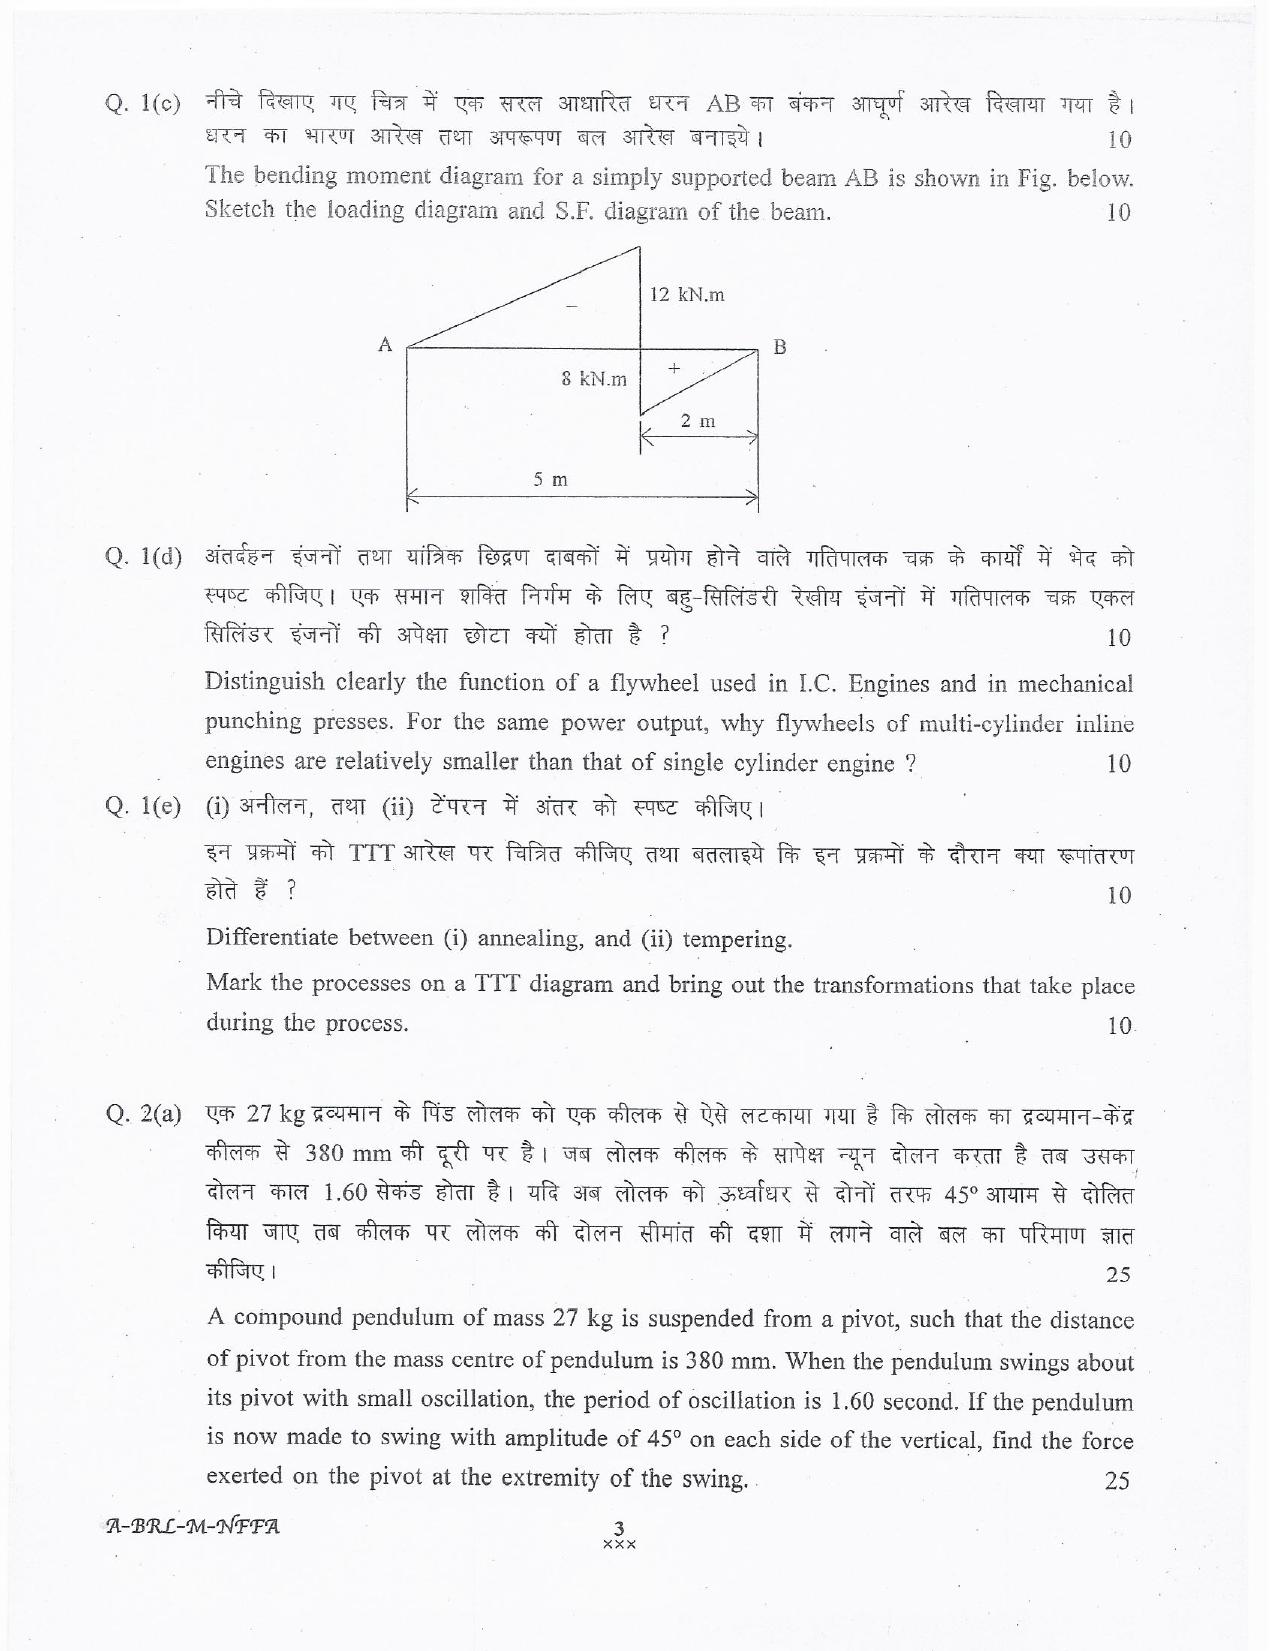 lakshadweep.gov.in Mechanical Engineering Question Papers - Page 3